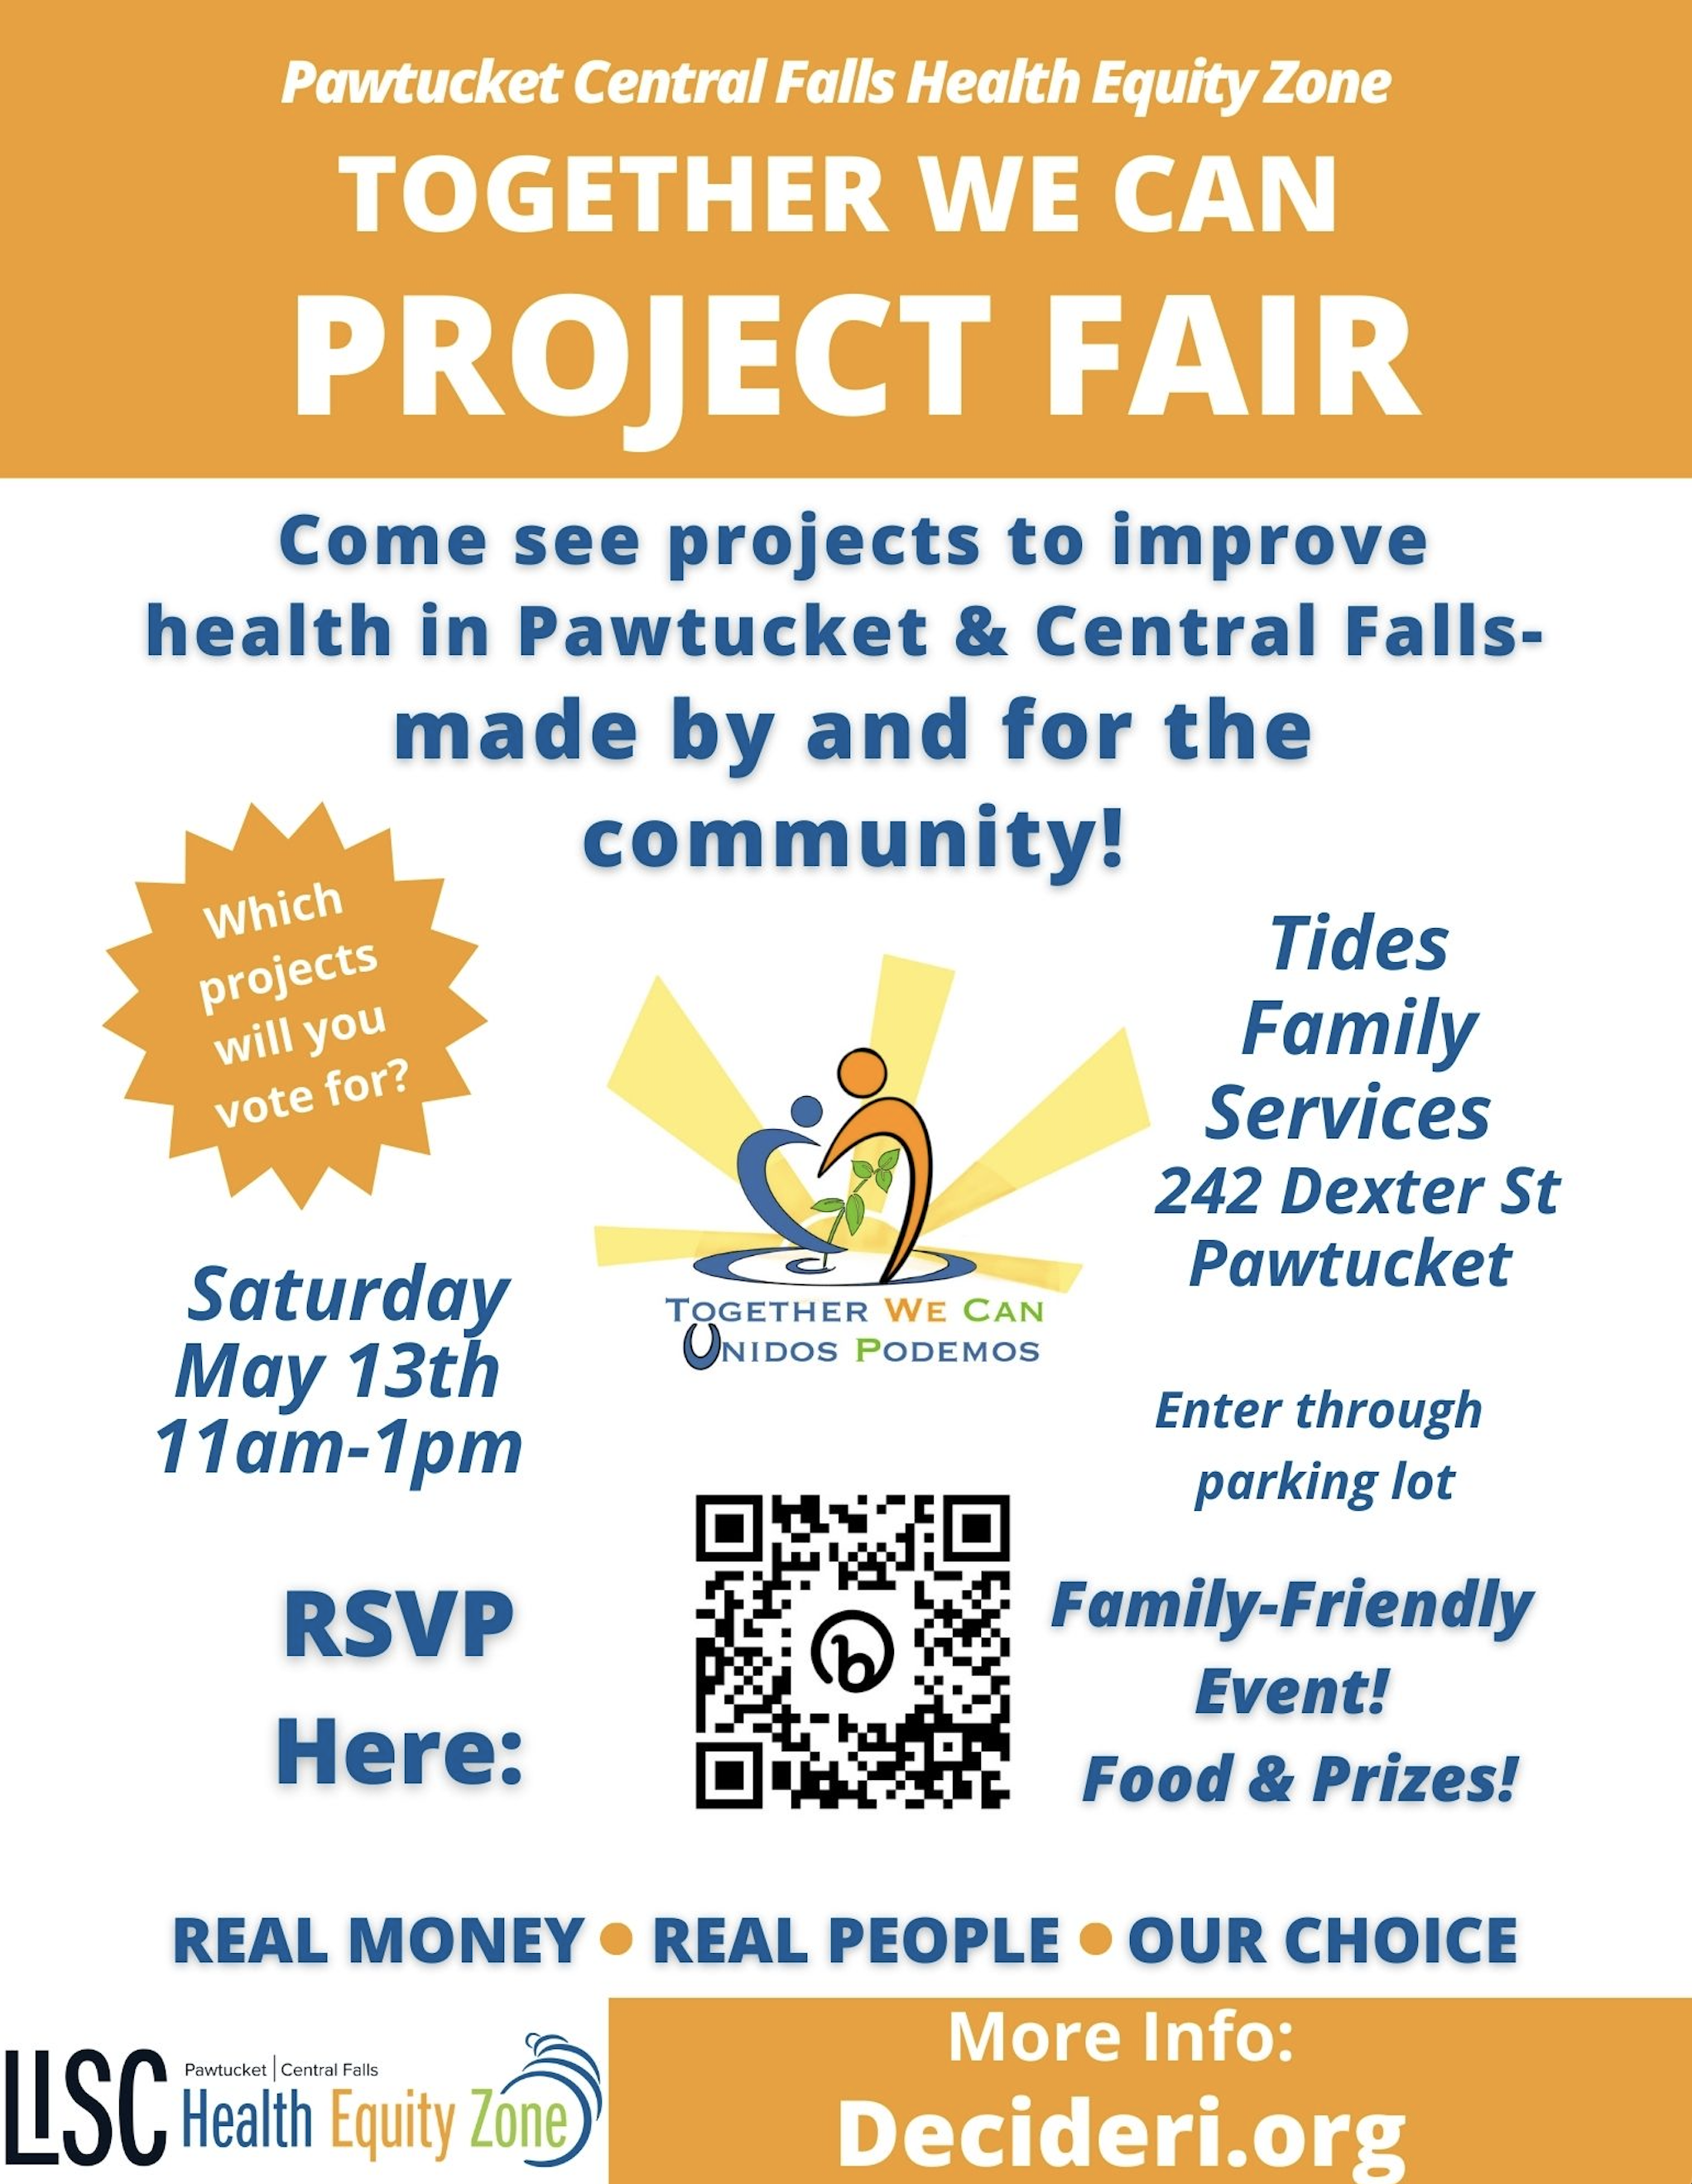 Together We Can Project Fair - Pawtucket Central Falls Health Equity Zone 